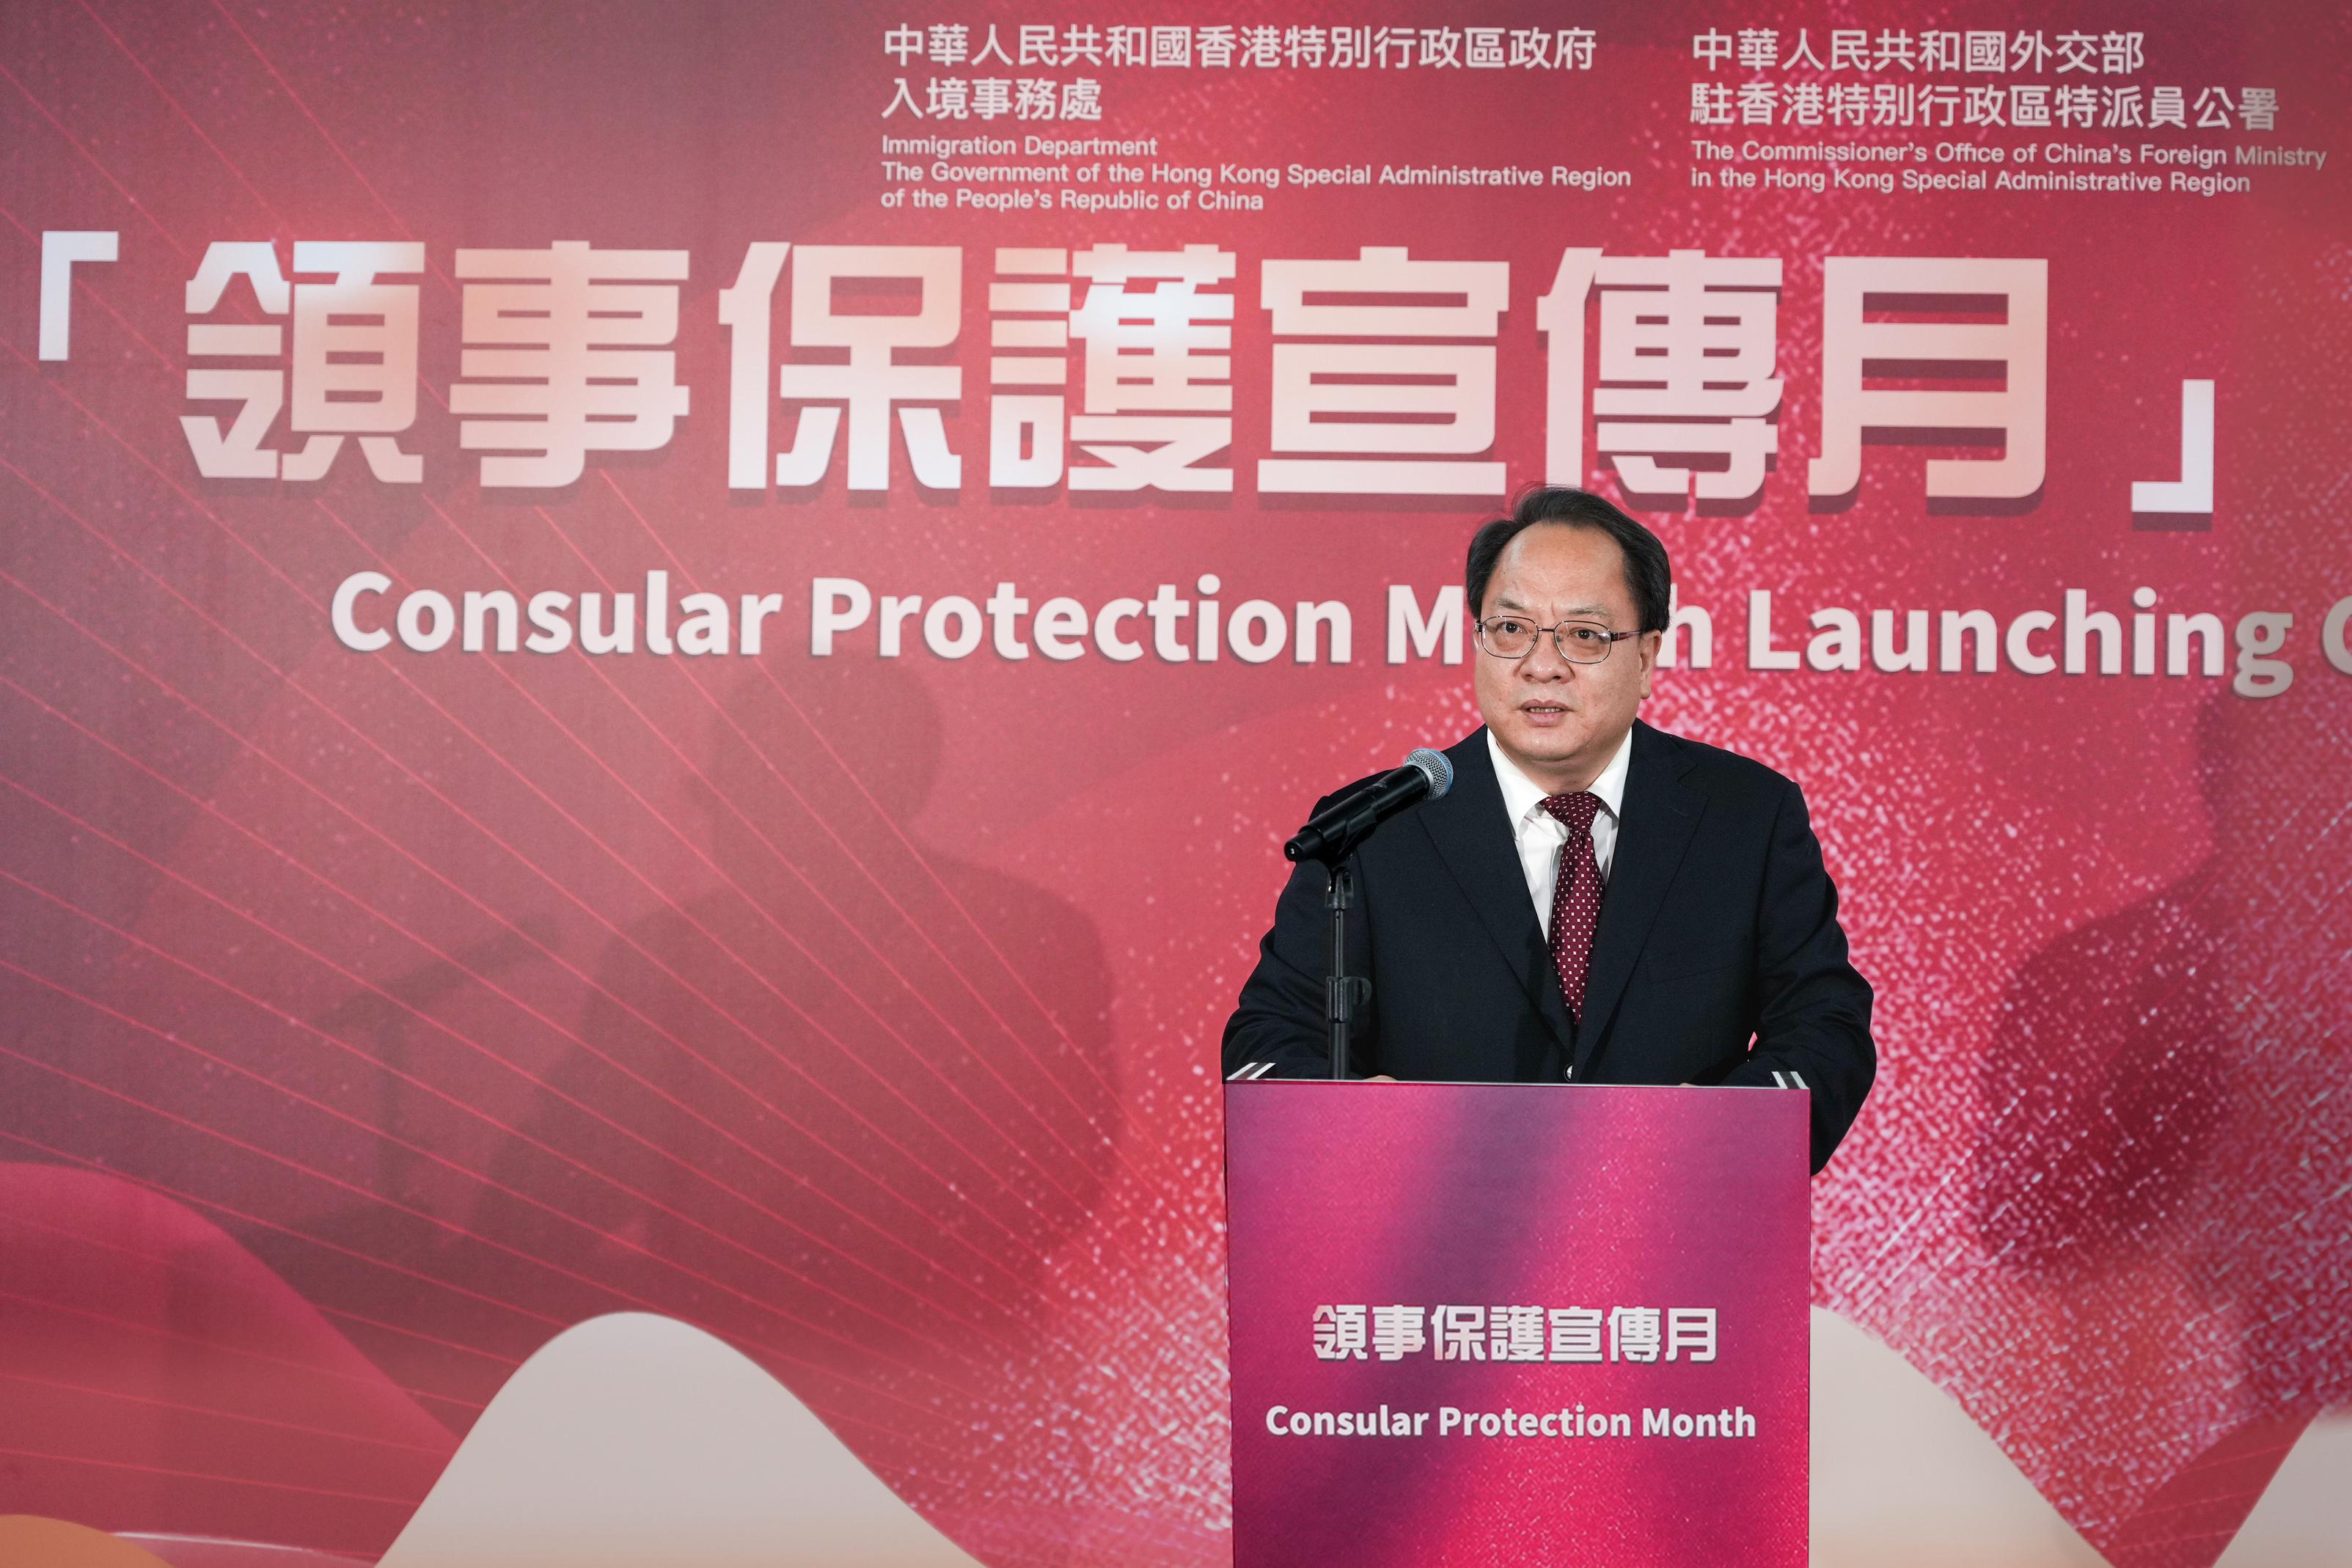 The Immigration Department and the Office of the Commissioner of the Ministry of Foreign Affairs in the Hong Kong Special Administrative Region (OCMFA) today (June 7) held the launching ceremony of the Consular Protection Month. Photo shows Deputy Commissioner of the OCMFA Mr Pan Yundong delivering a speech at the event. 